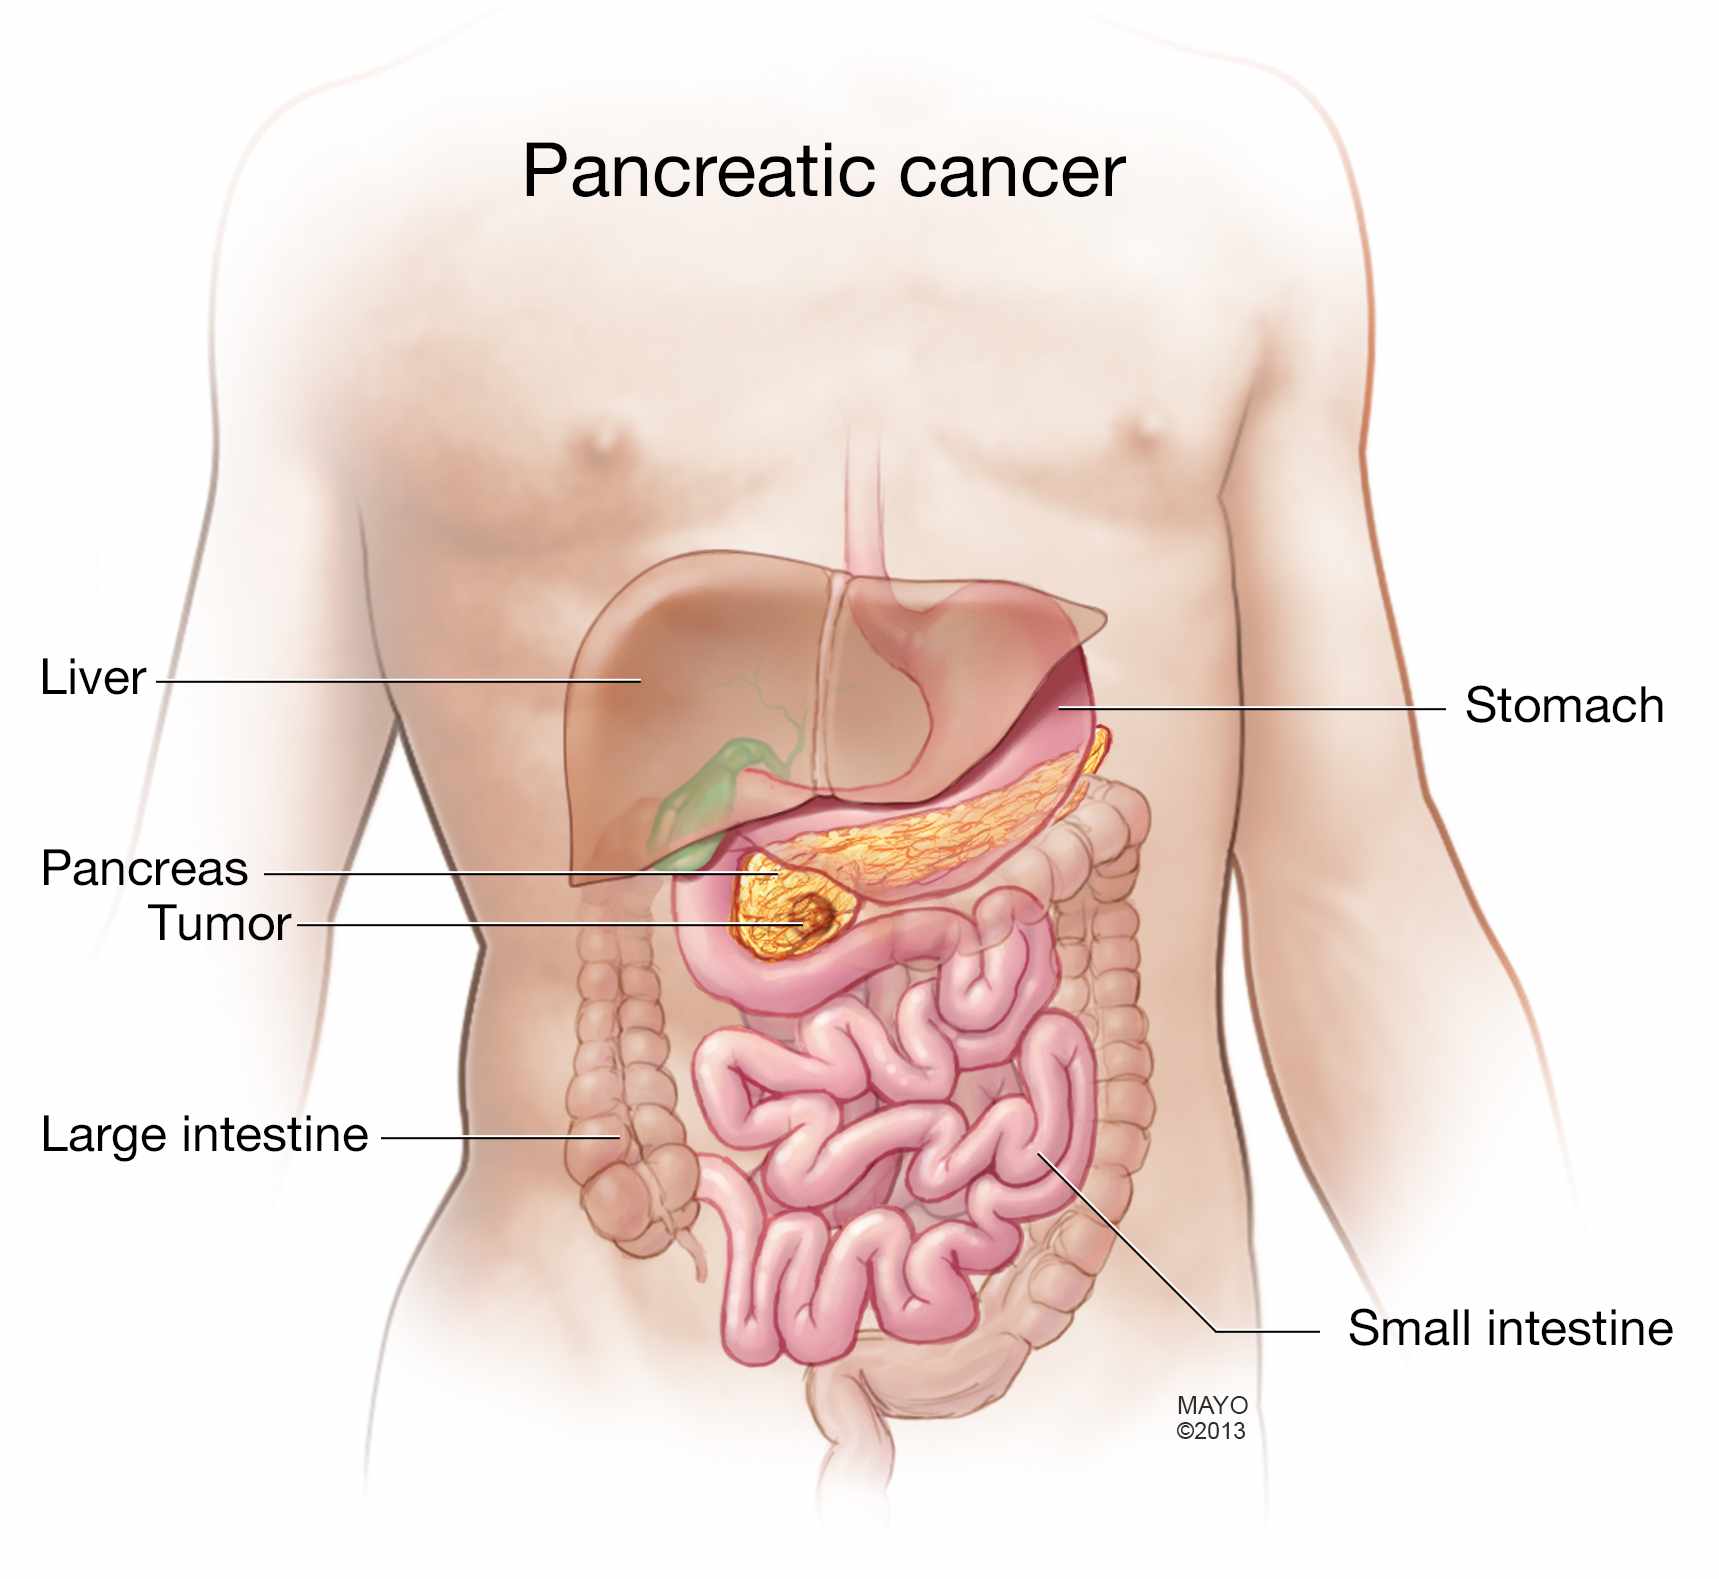 illustration of pancreatic cancer and related anatomy